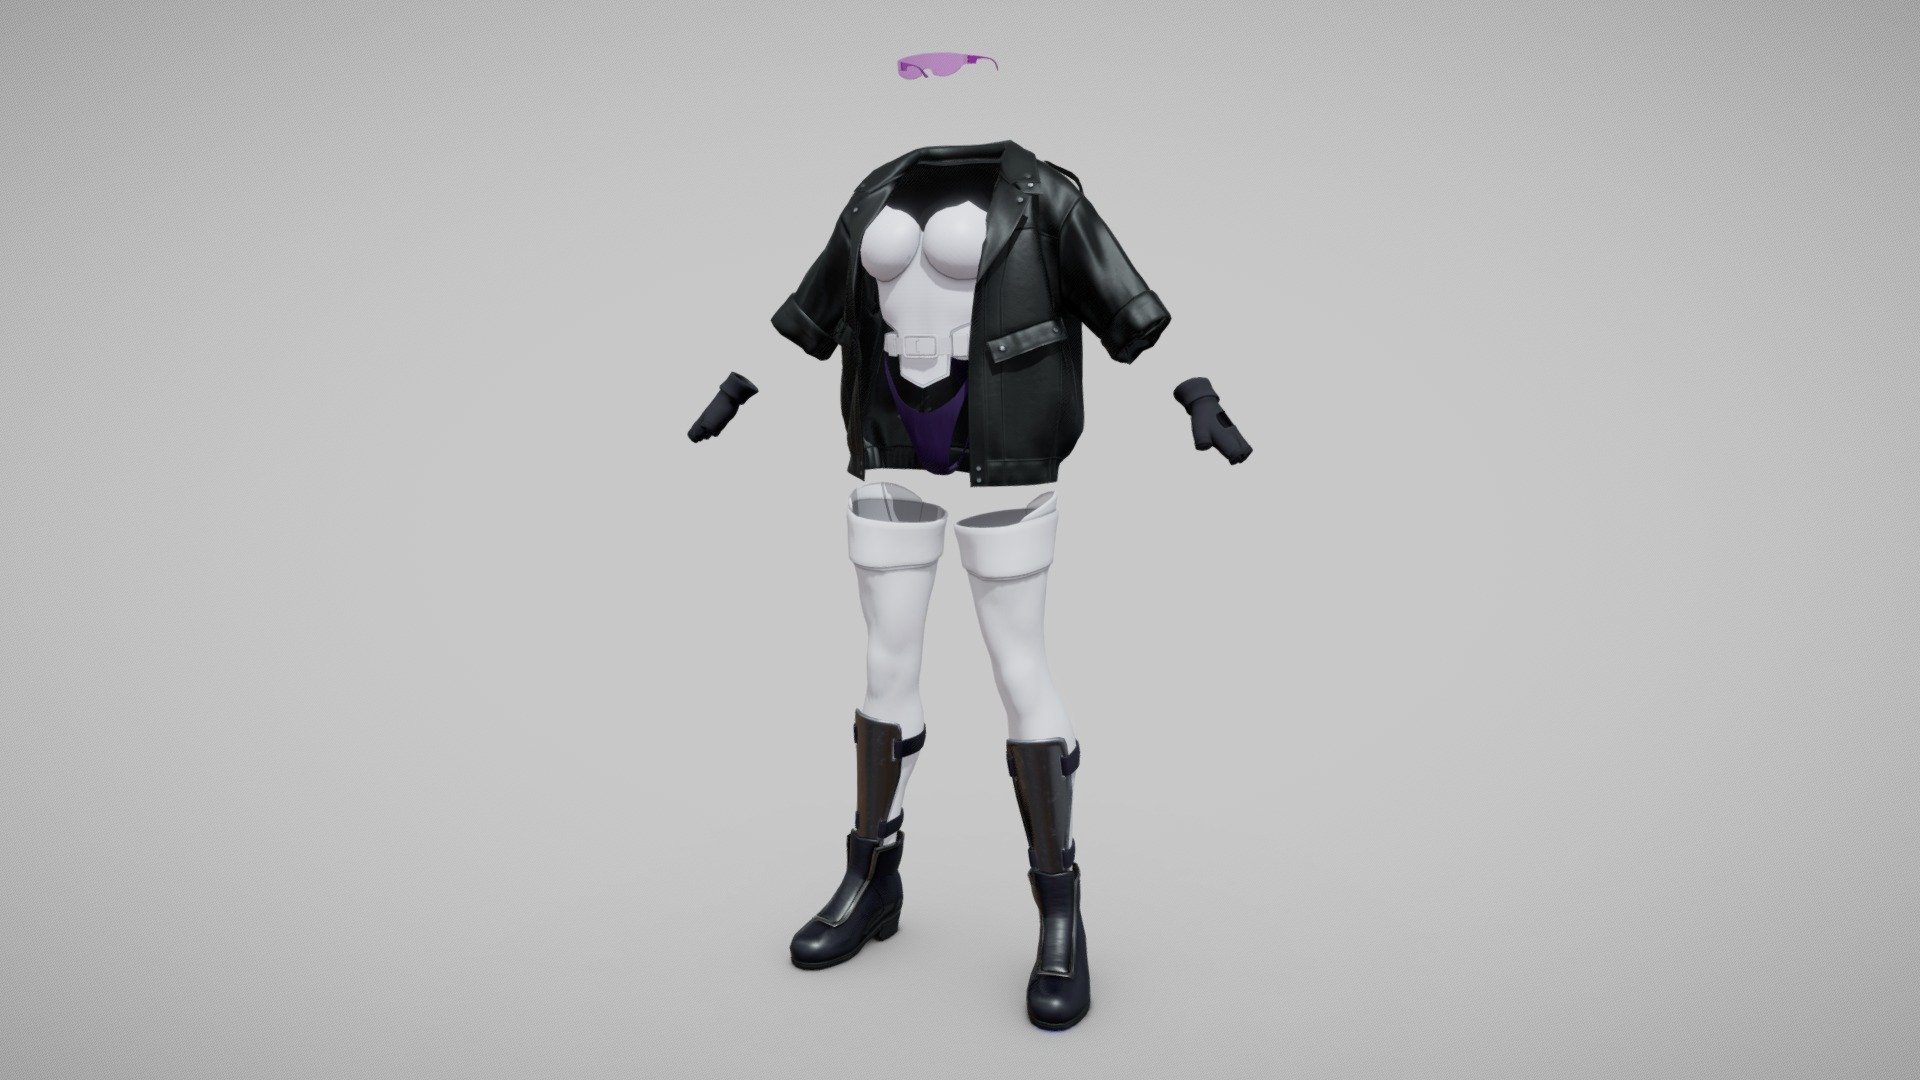 Ghost in the shell - Motoko Kusanagi Outfit costume set:
Coat, stockings, boots, gloves, penties, corset and glasses ;)
Quad-sub-div ready assets.
9 separate objects with 4k PBR textures.
All formats included (fbx obj glb dae) - GITS Motoko Kusanagi Outfit costume set - Buy Royalty Free 3D model by DeepDown 3d model